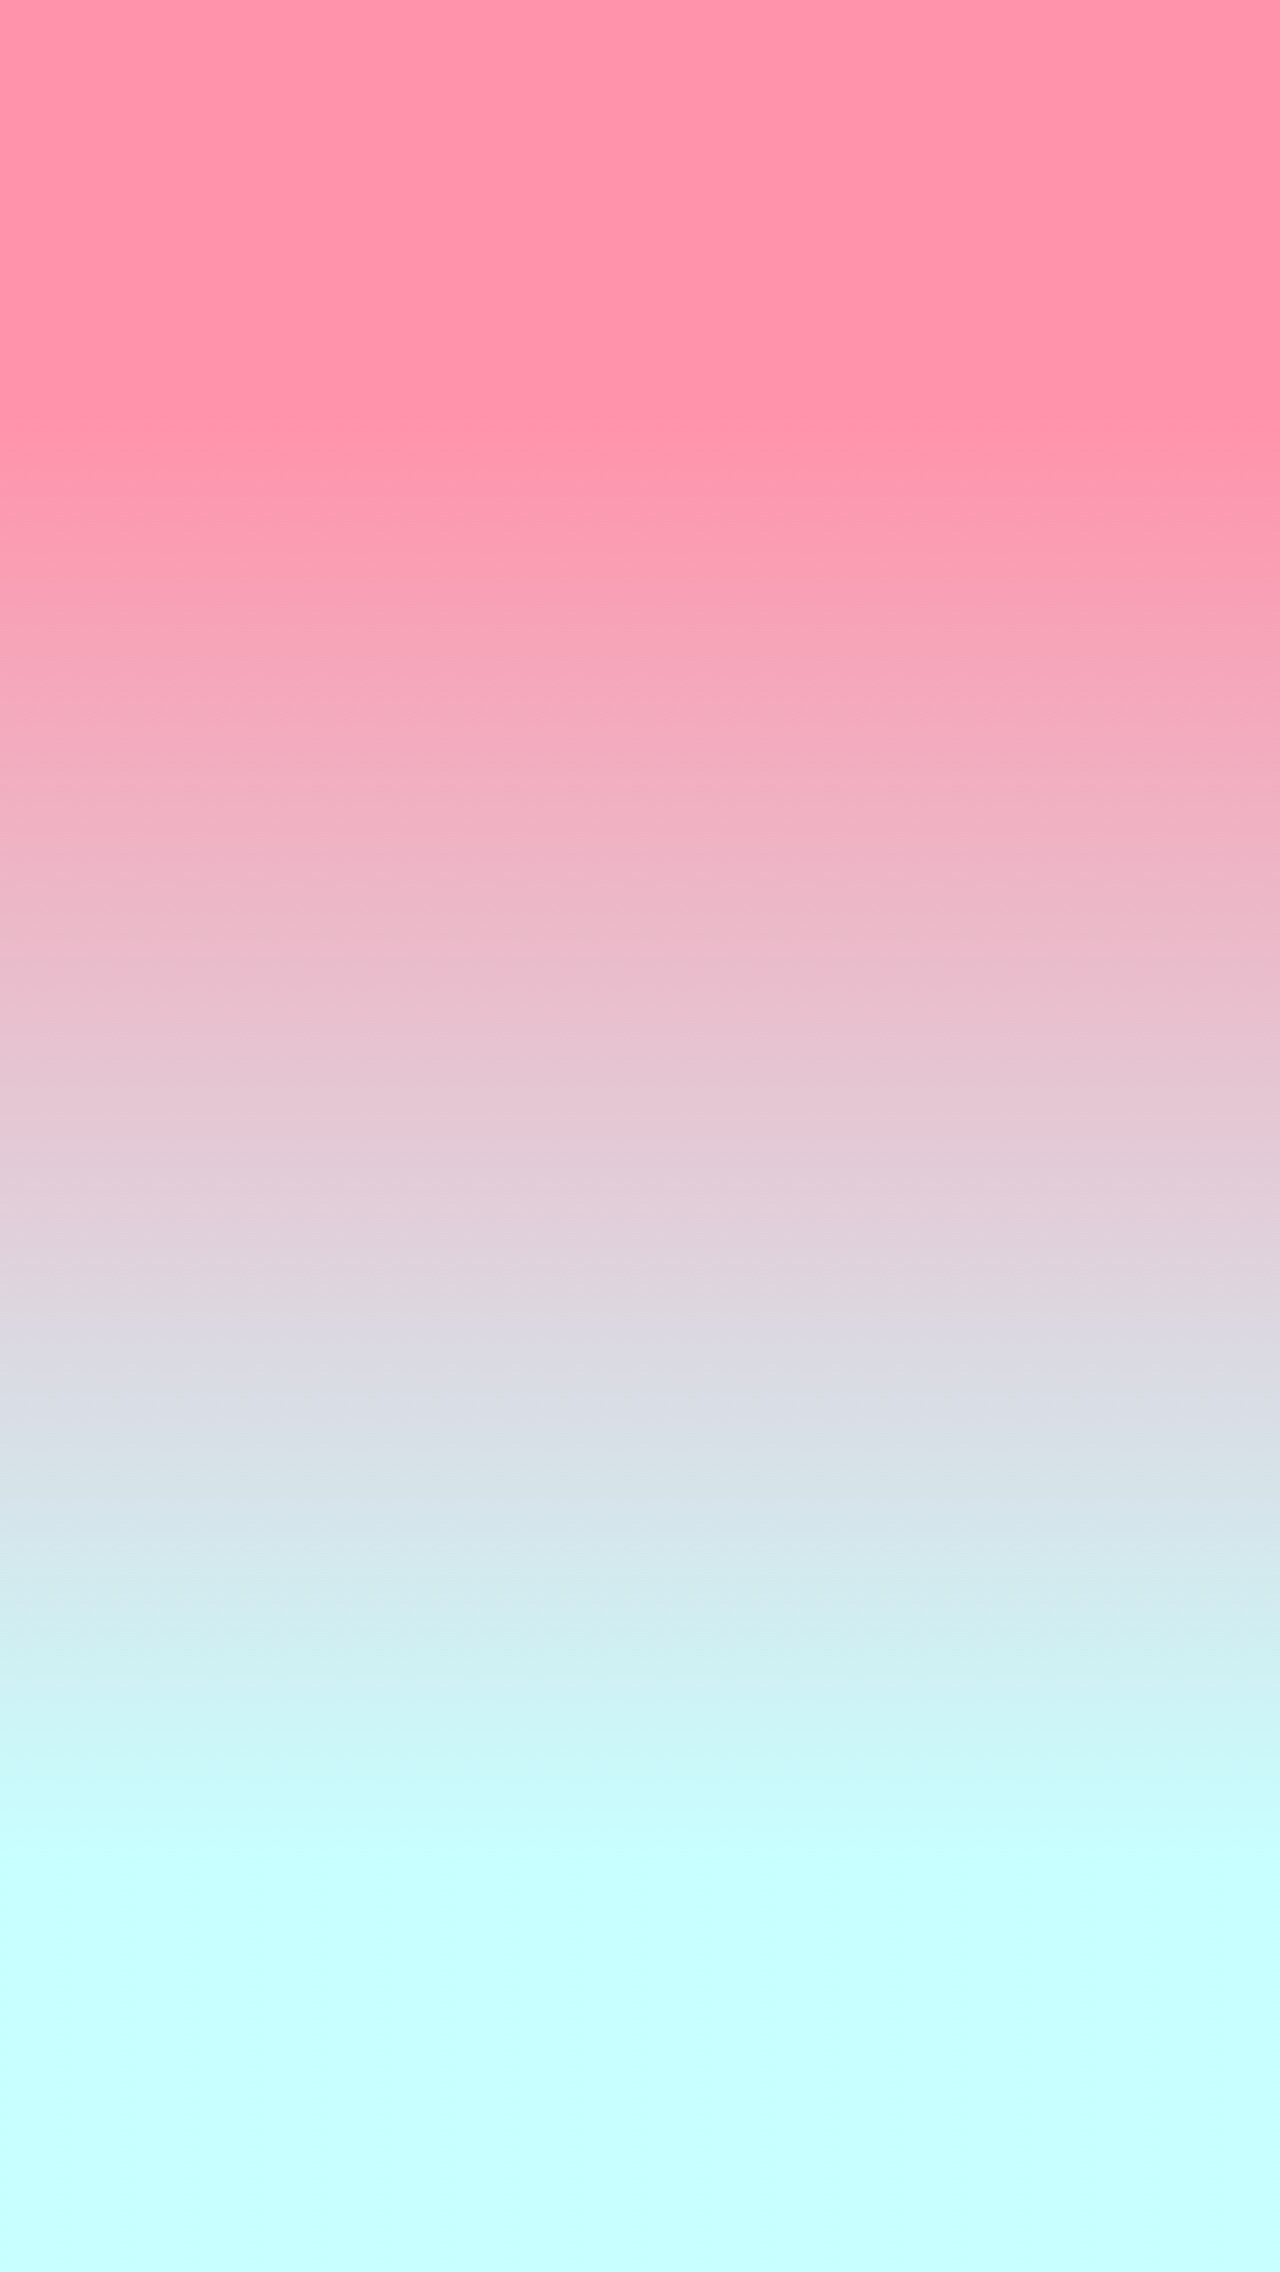 1280x2272 Pastel Pink and blue ombre iphone wallpaper phone background lock screen